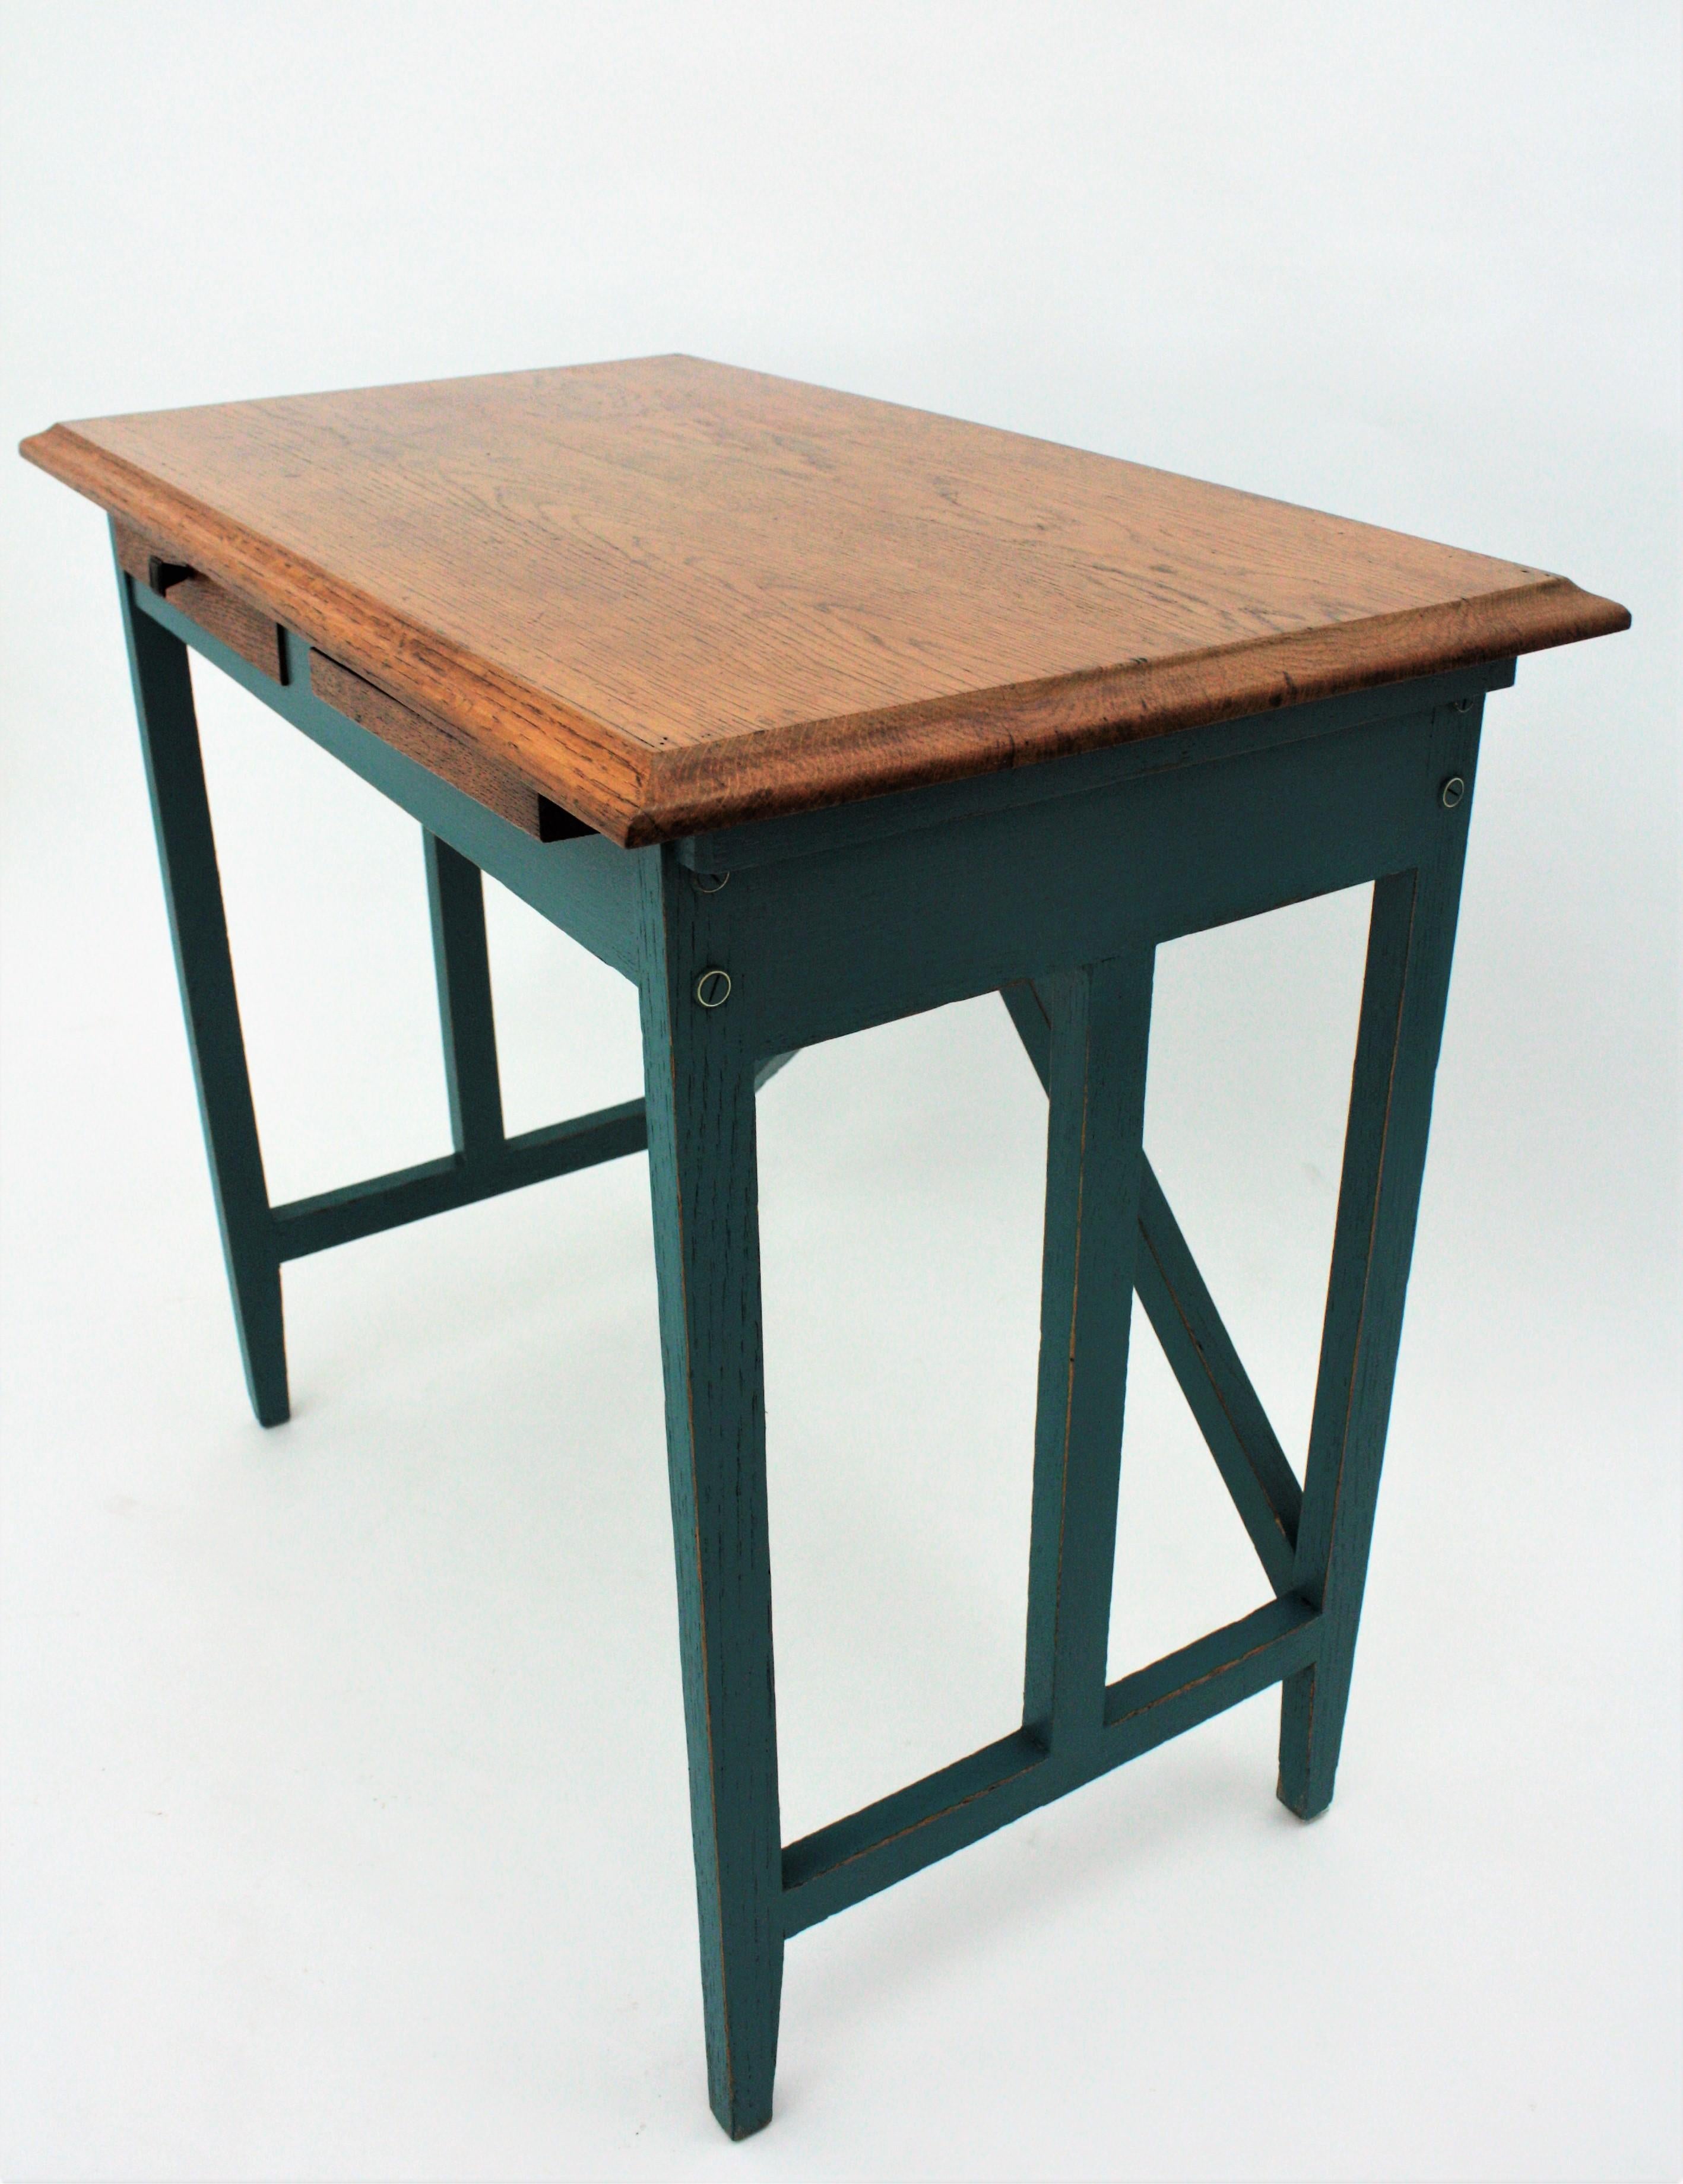 Spanish Desk and Stool in Oak with Green Blue Patina, 1930s For Sale 6